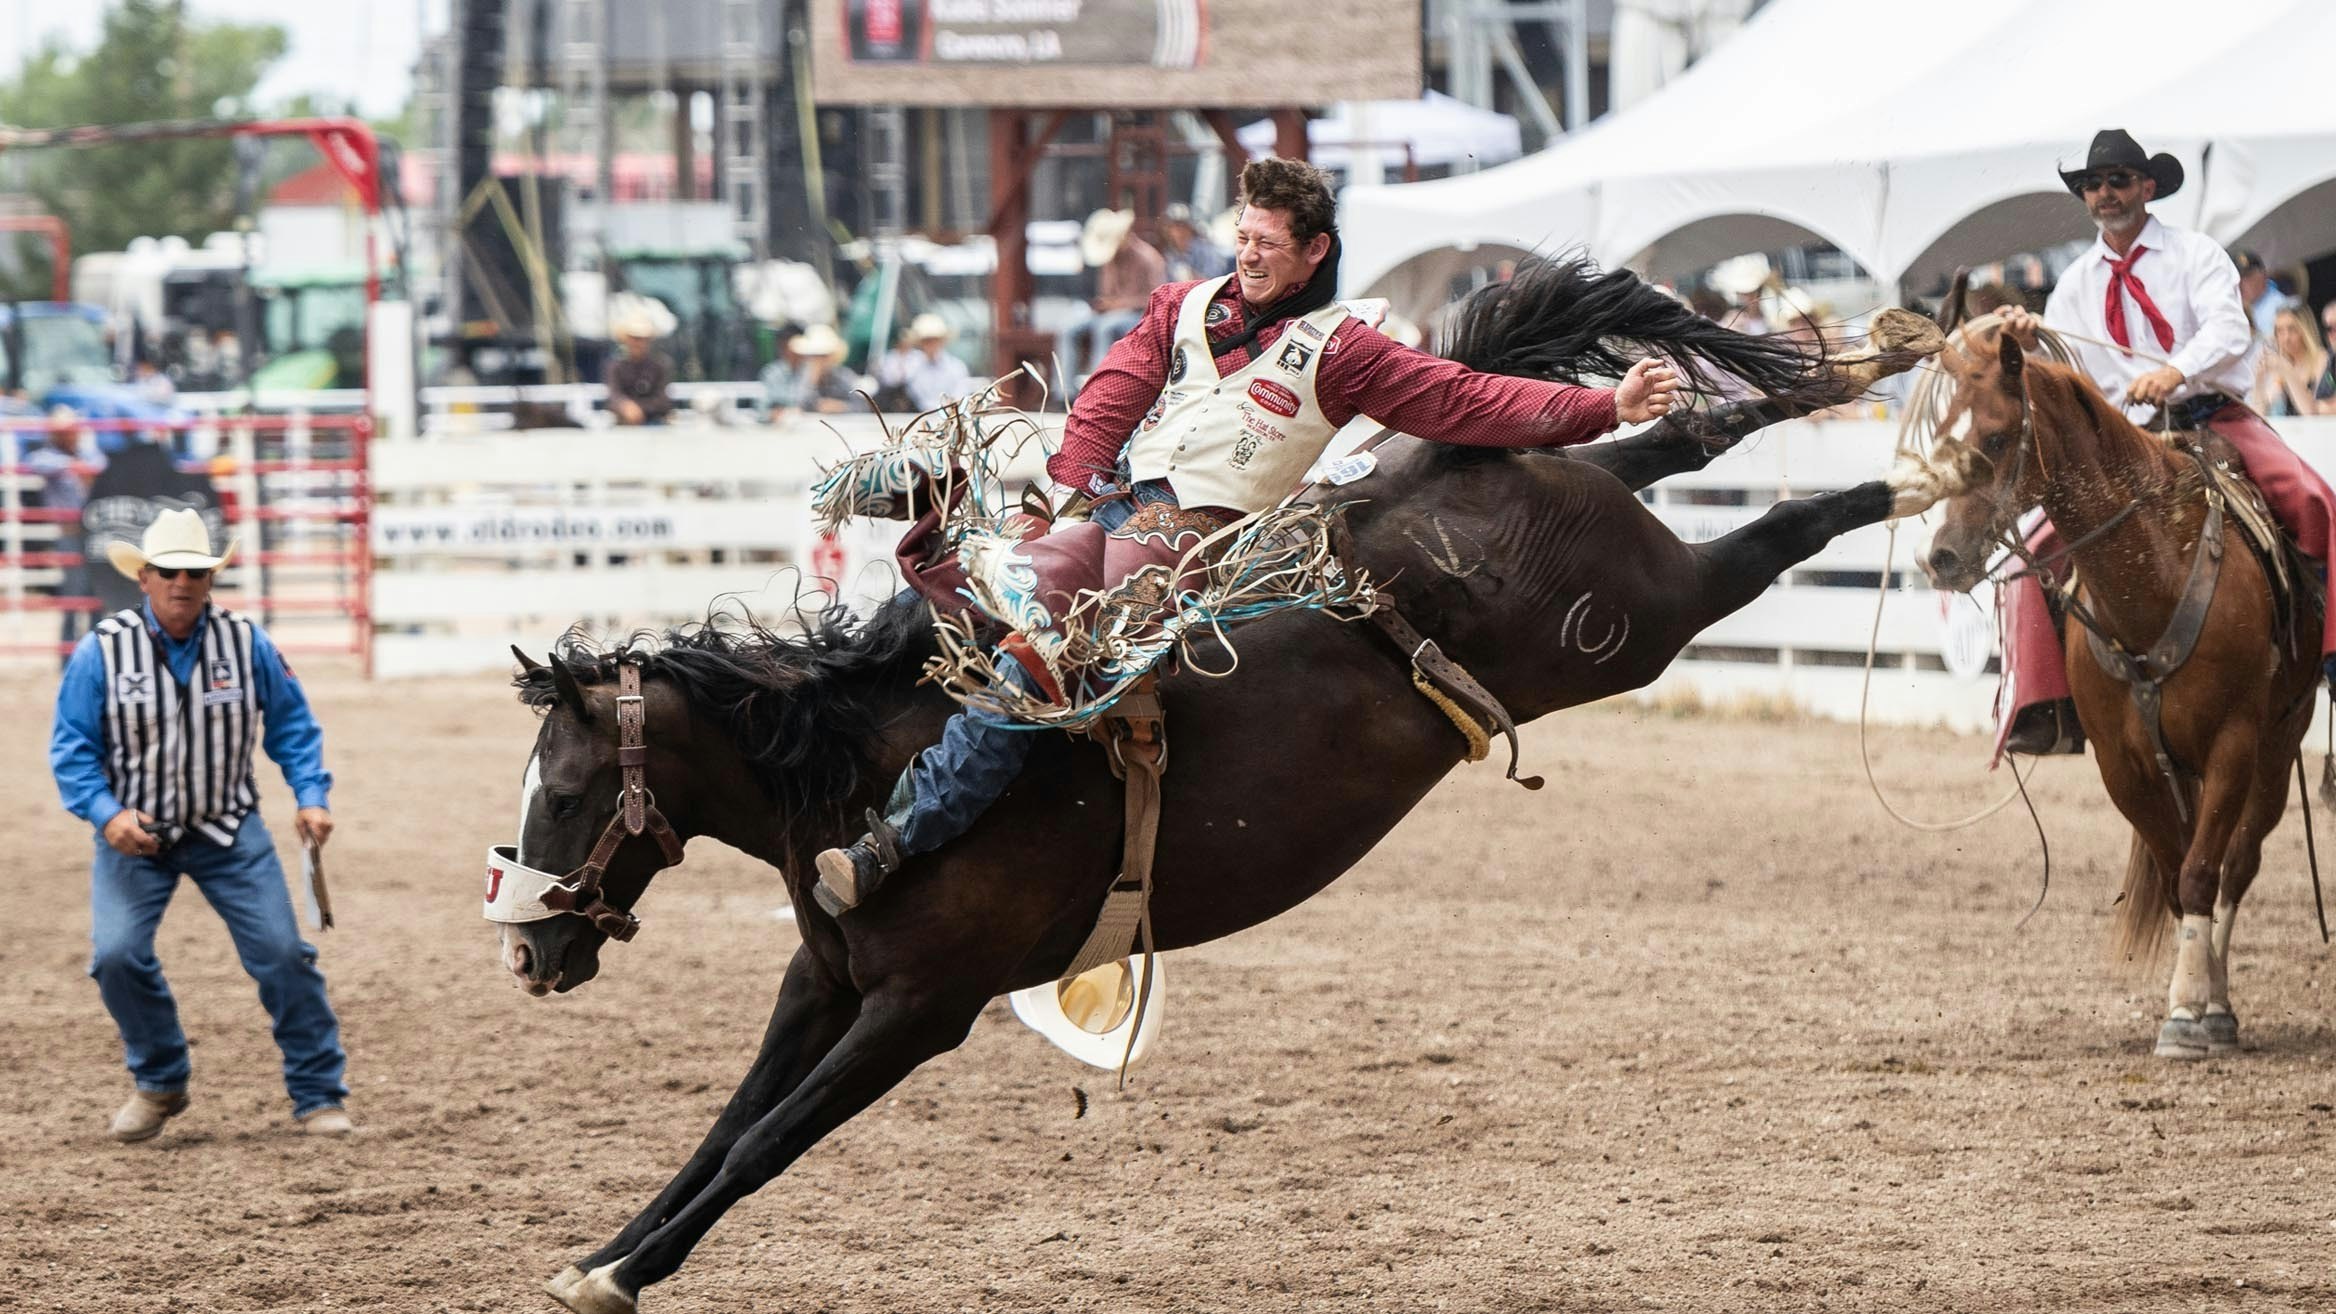 Kade Sonnier from Carencro, LA rides his bronc in the bareback riding for a score of 84 points at Cheyenne Frontier Days on July 26, 2023.